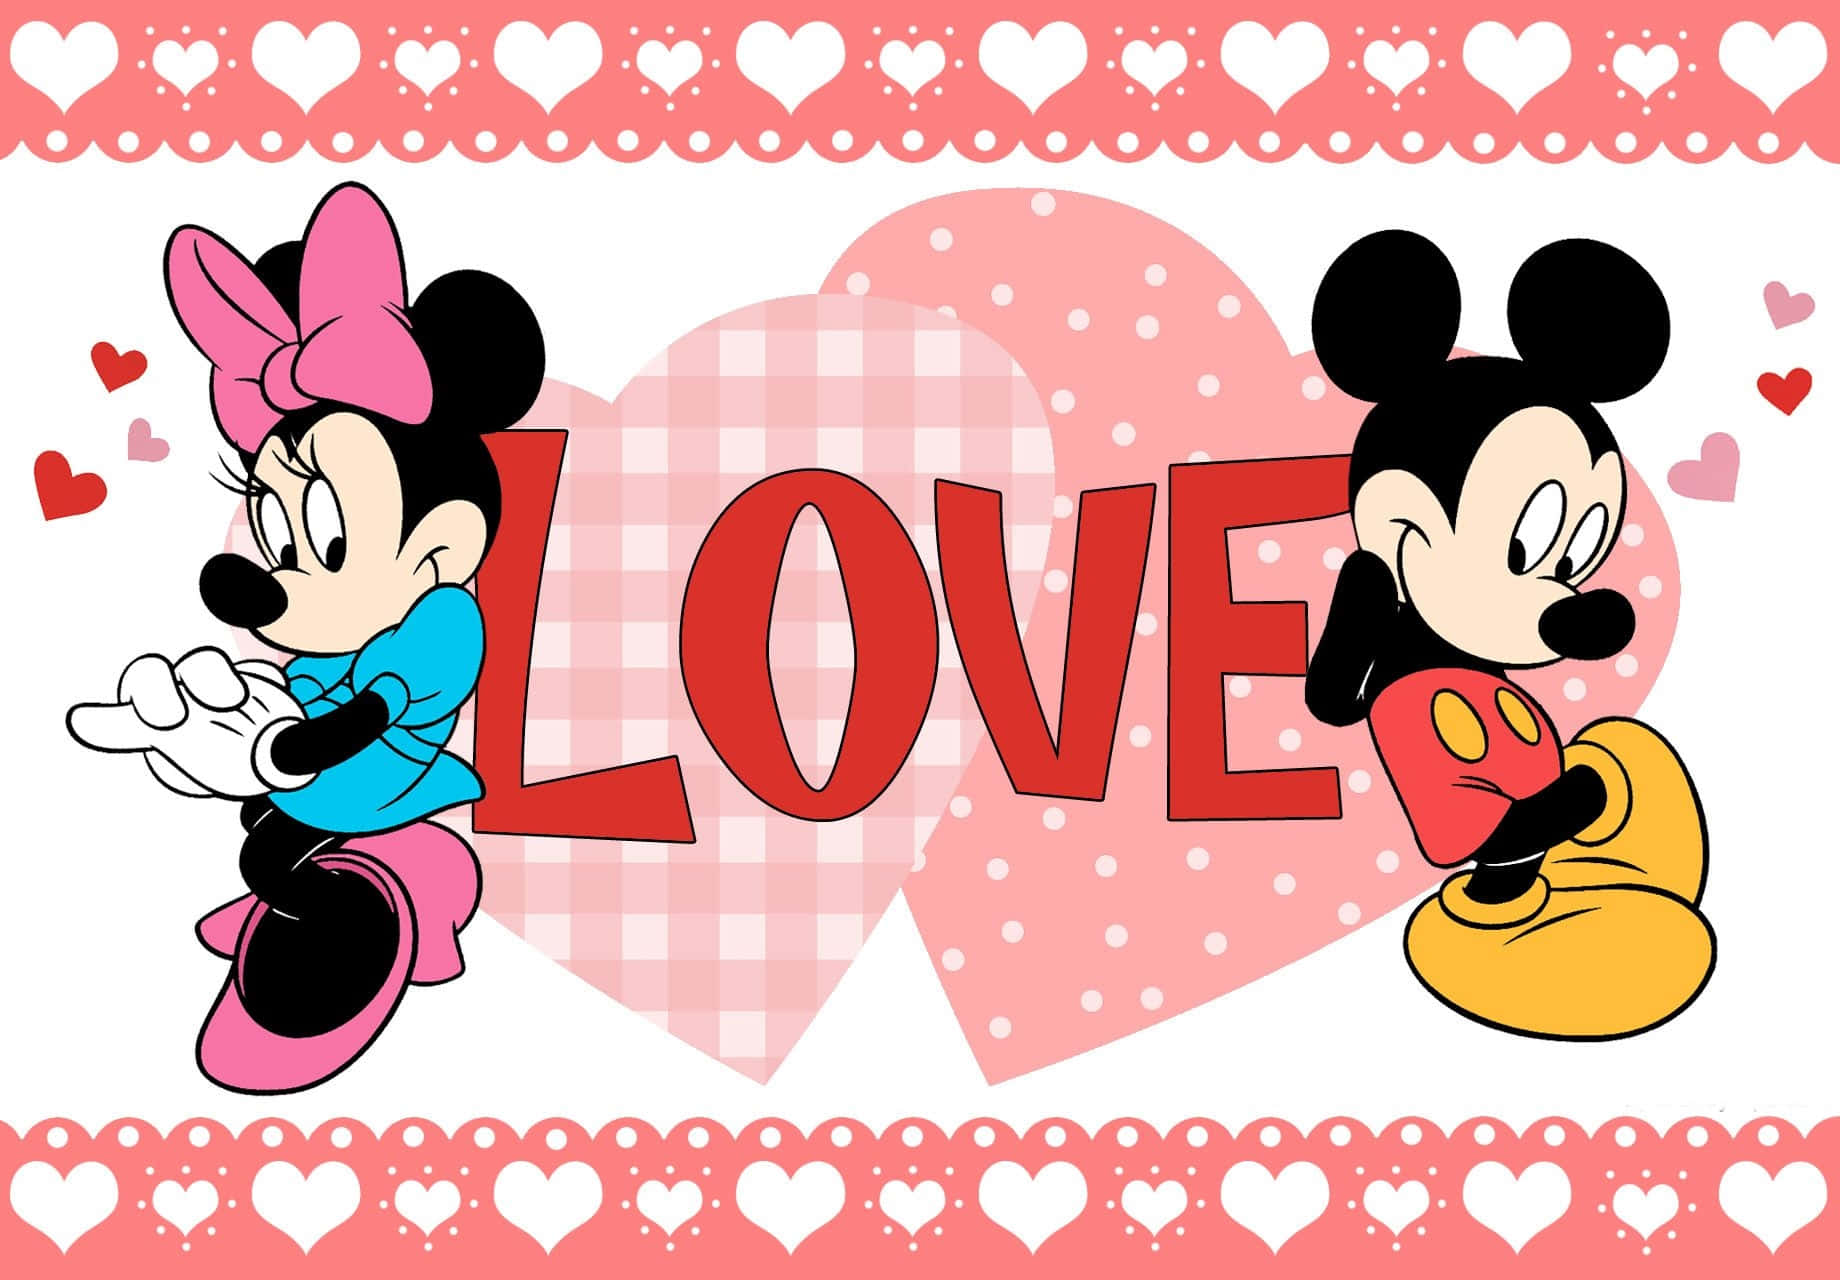 Mickey and Minnie Mouse, enjoying a romantic night out at the clubhouse